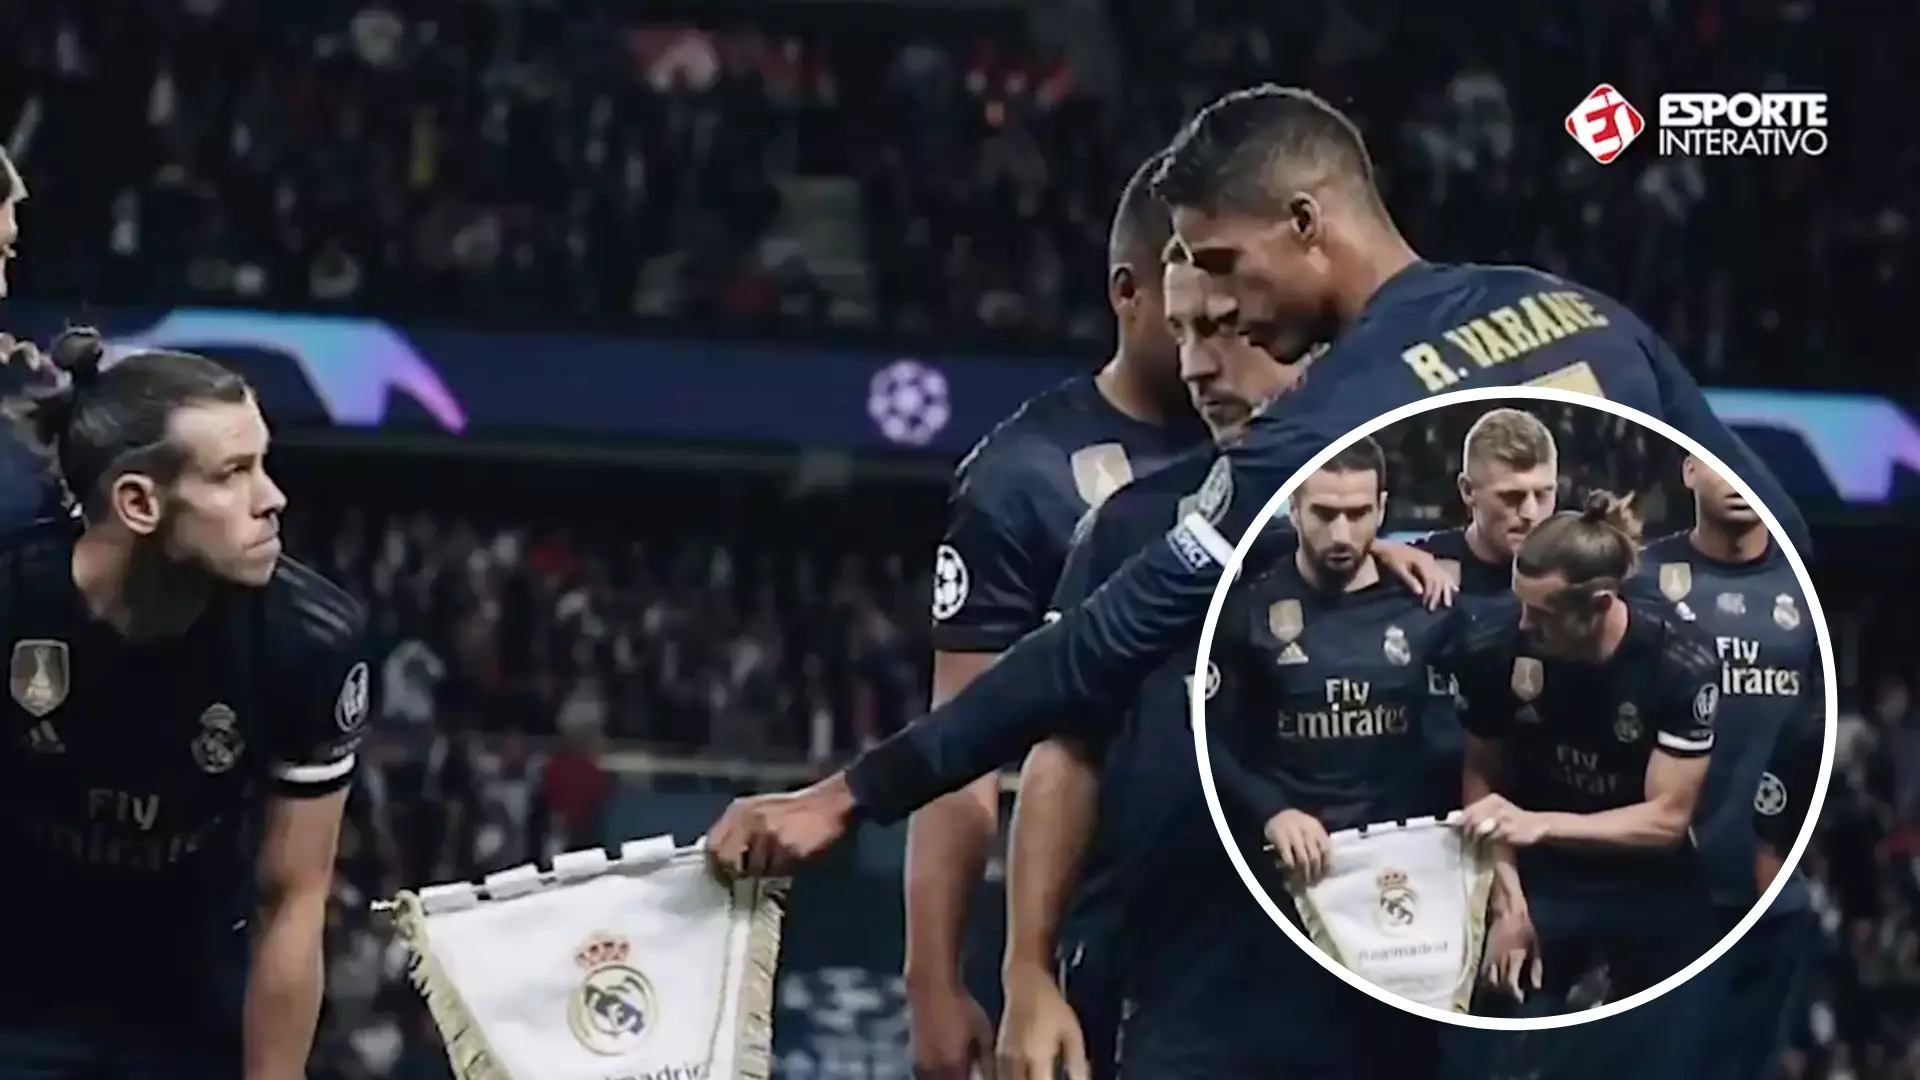 Gareth Bale 'Refused' To Hold The Real Madrid Crest For Team Photo Ahead Of PSG Clash